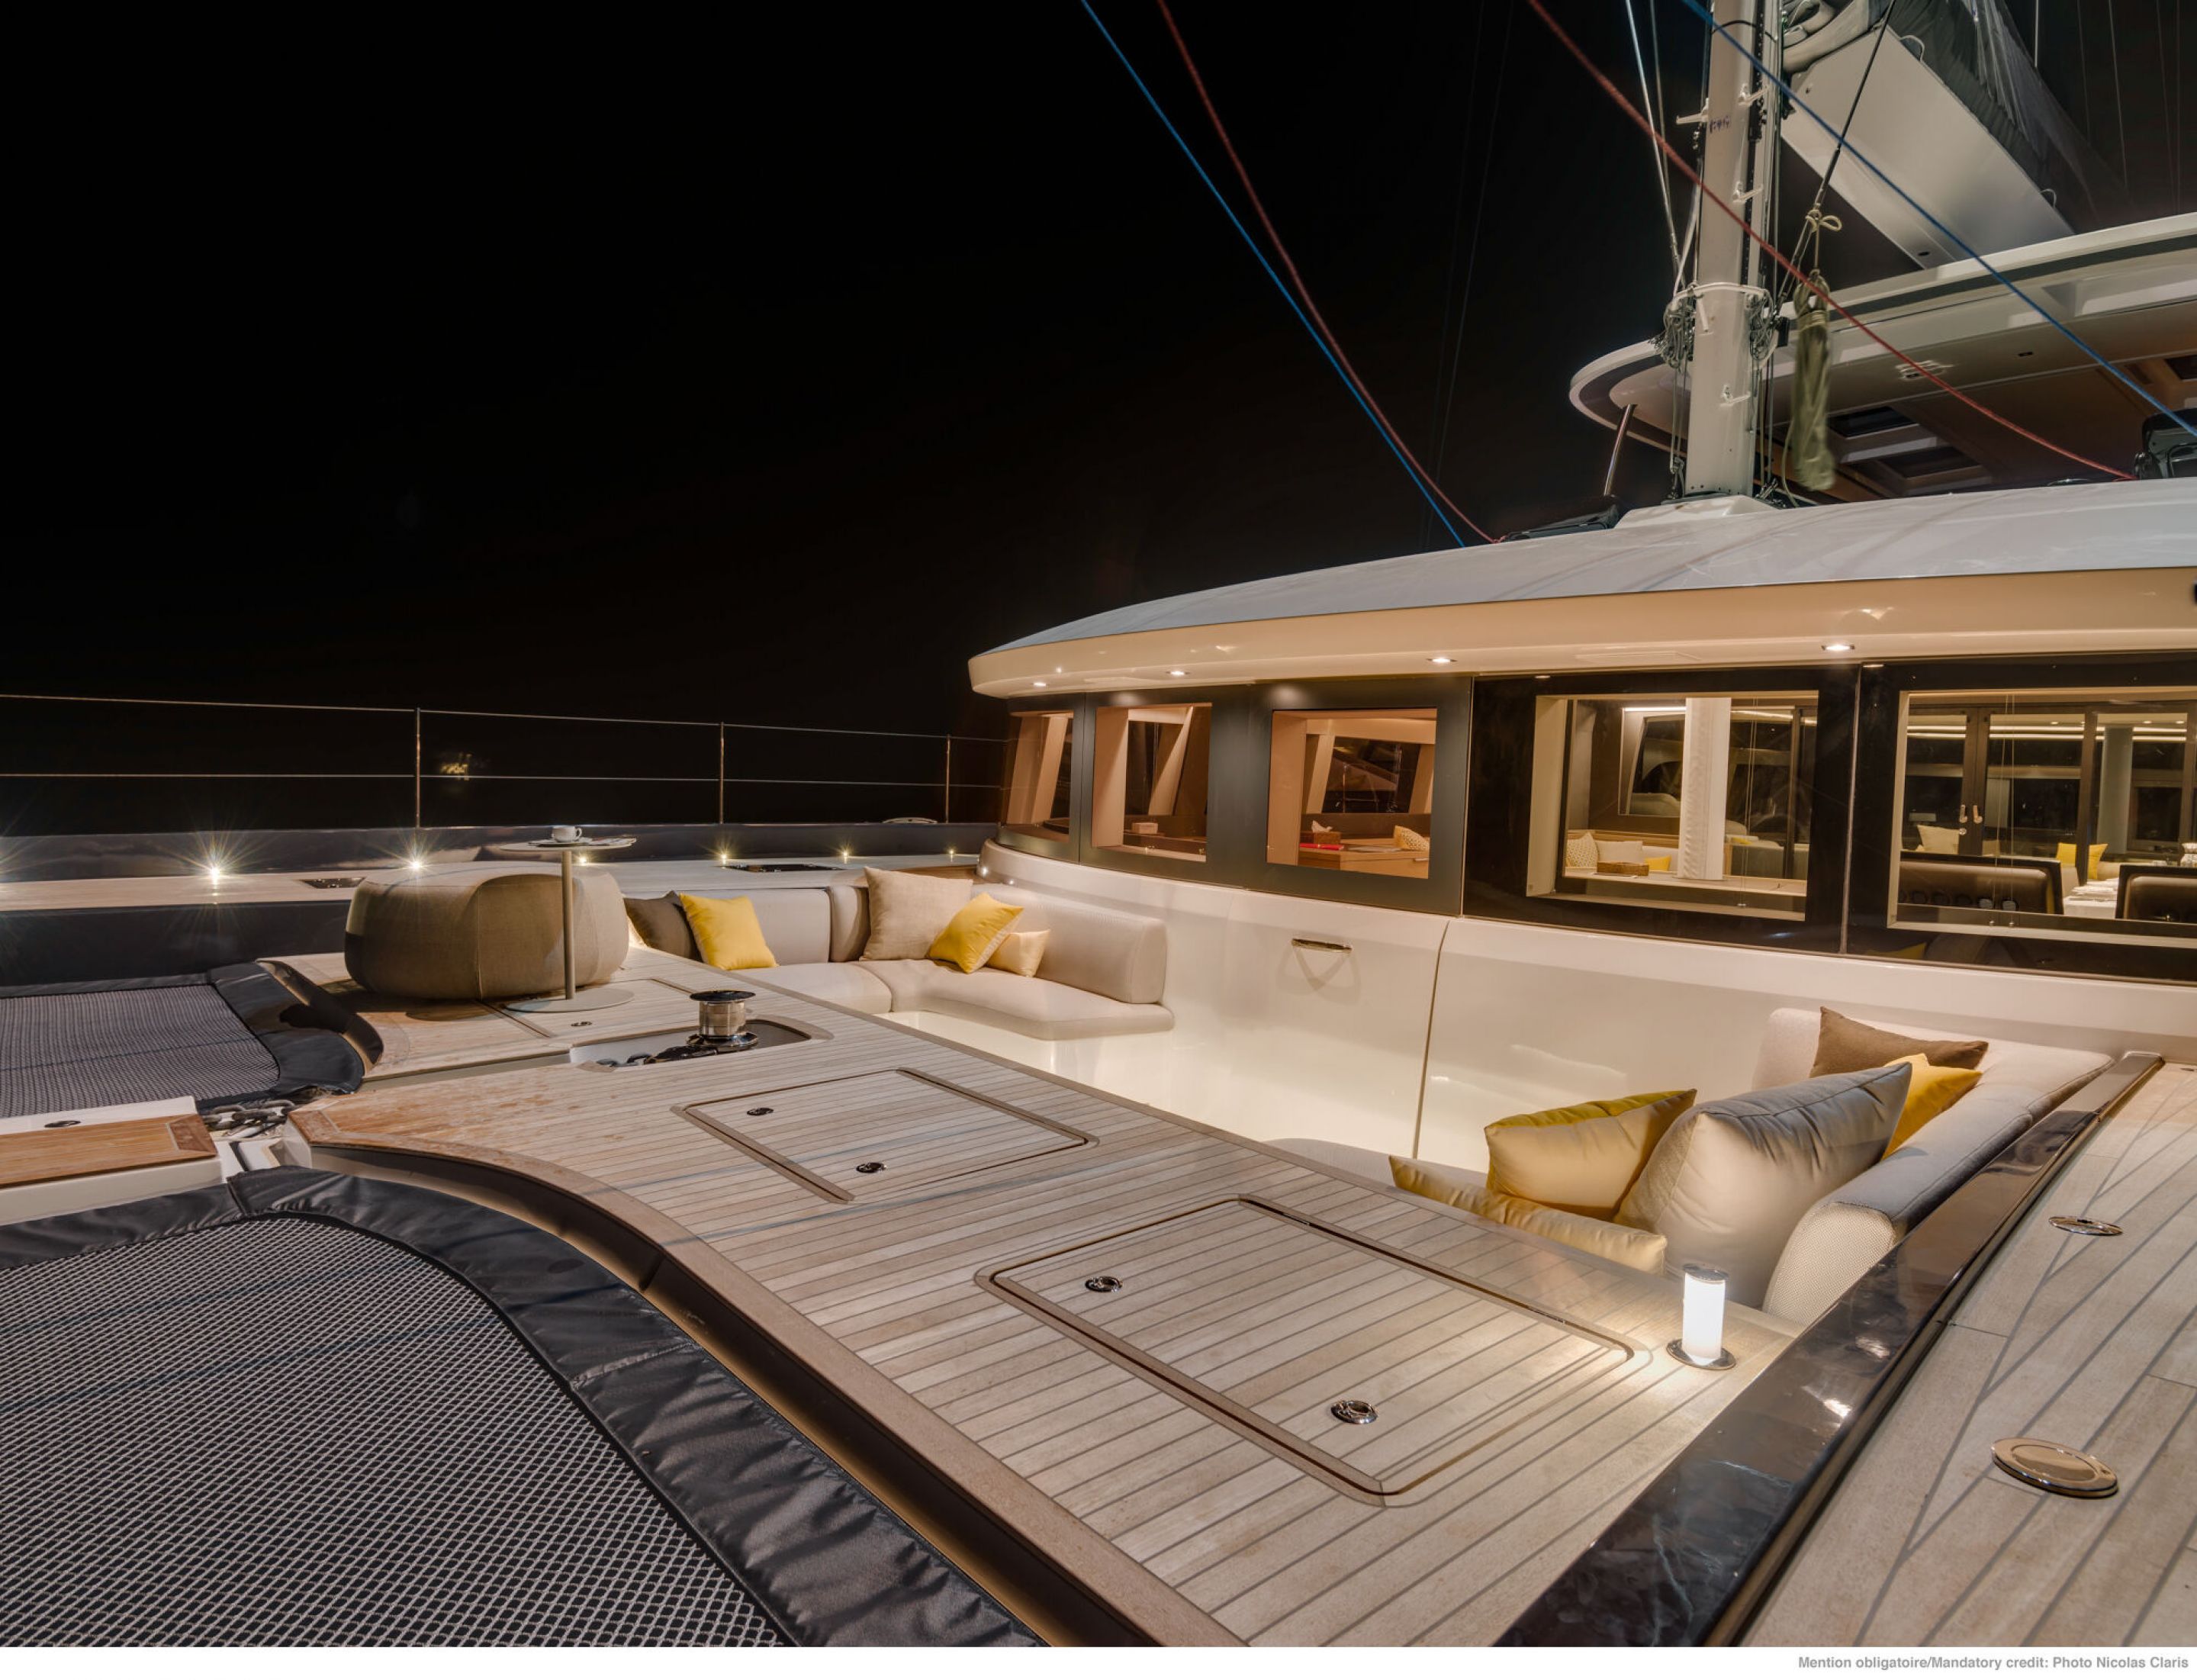 Foredeck night time